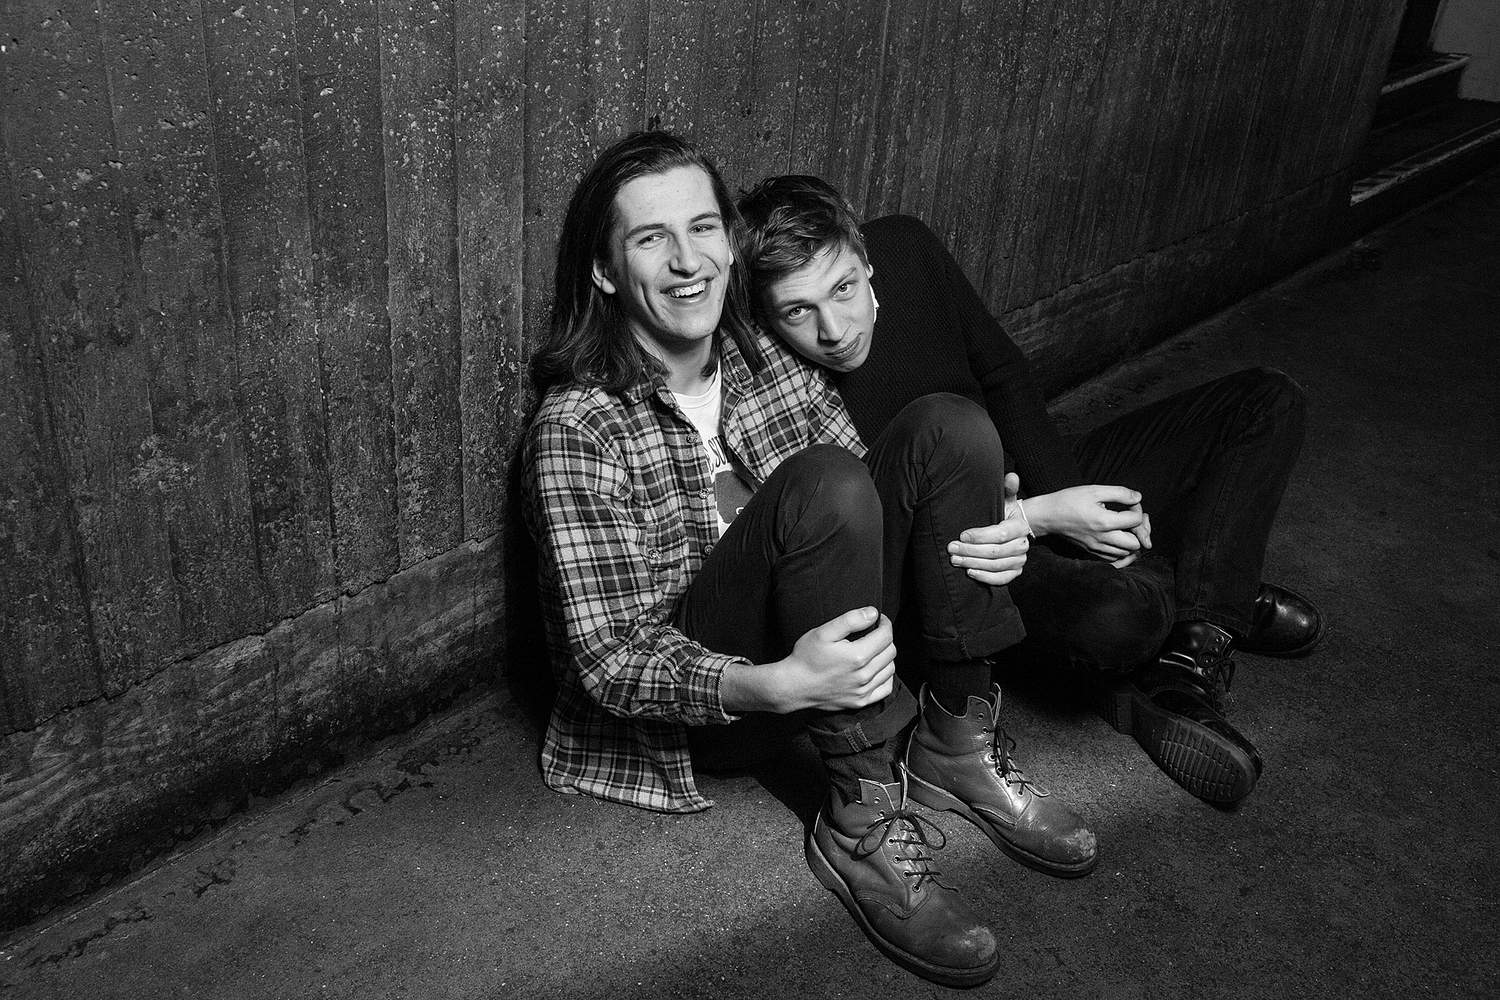 Drenge to preview new material live this week